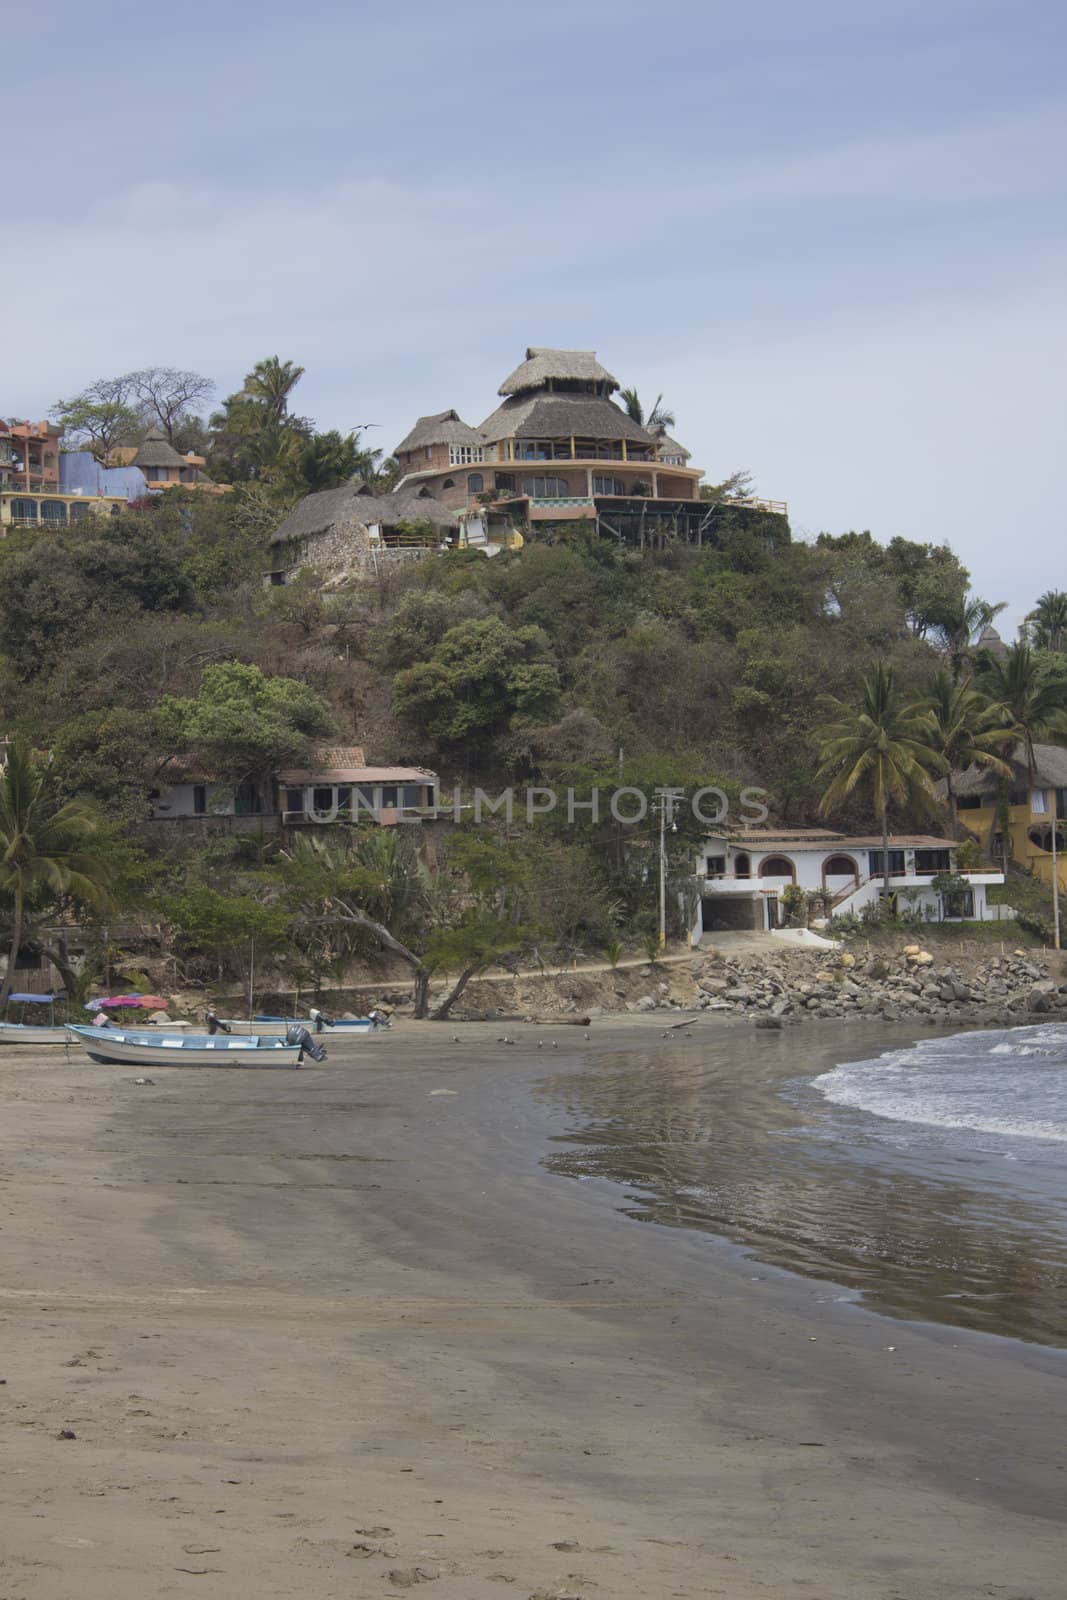 A beach in Mexico with large homes by jeremywhat